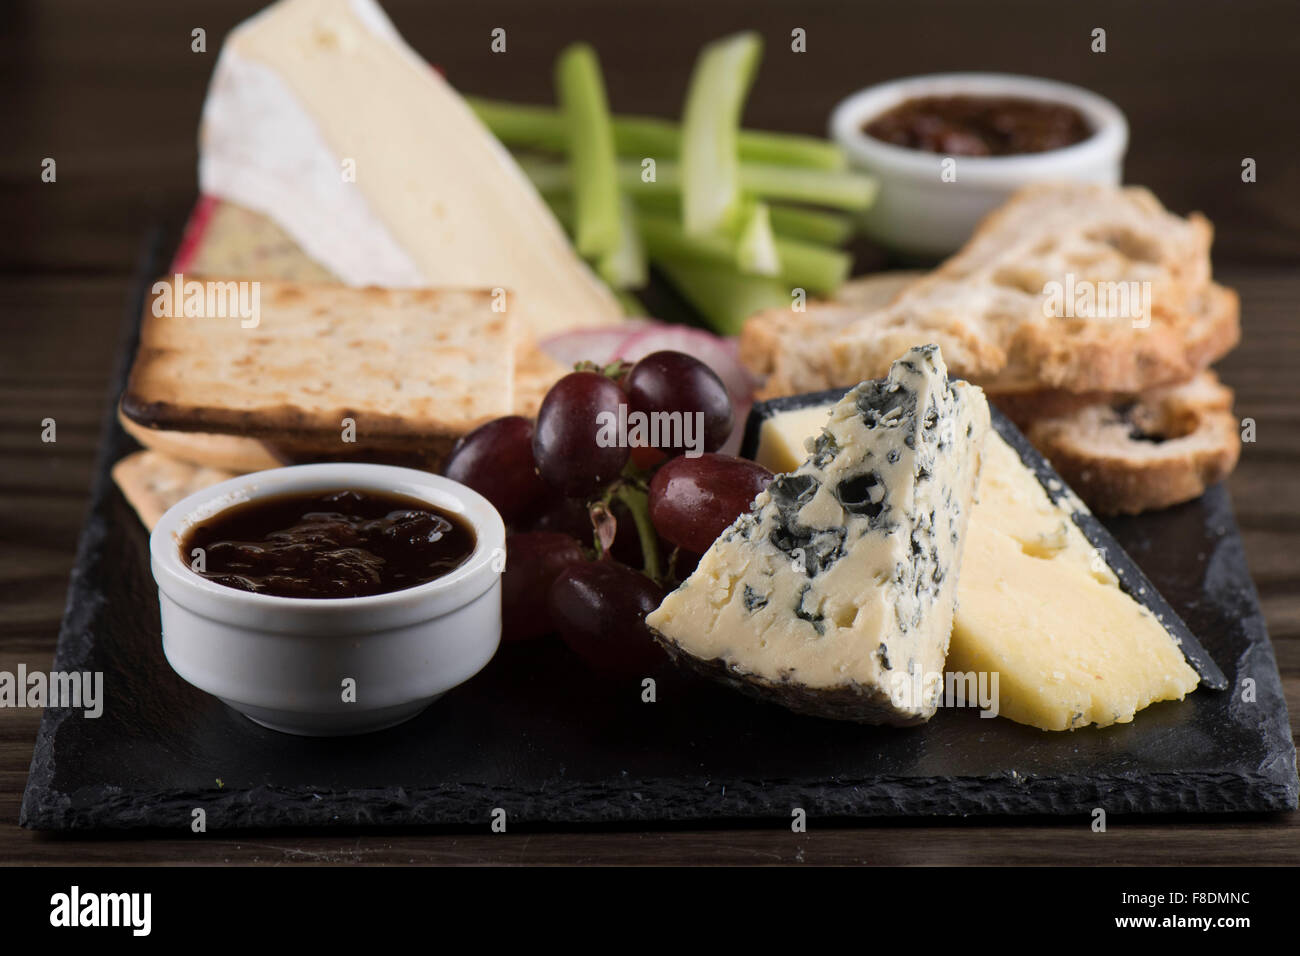 A cheese plate on slate with chutney, cheddar, stilton cheese, crackers, brie, grapes and celery. Stock Photo